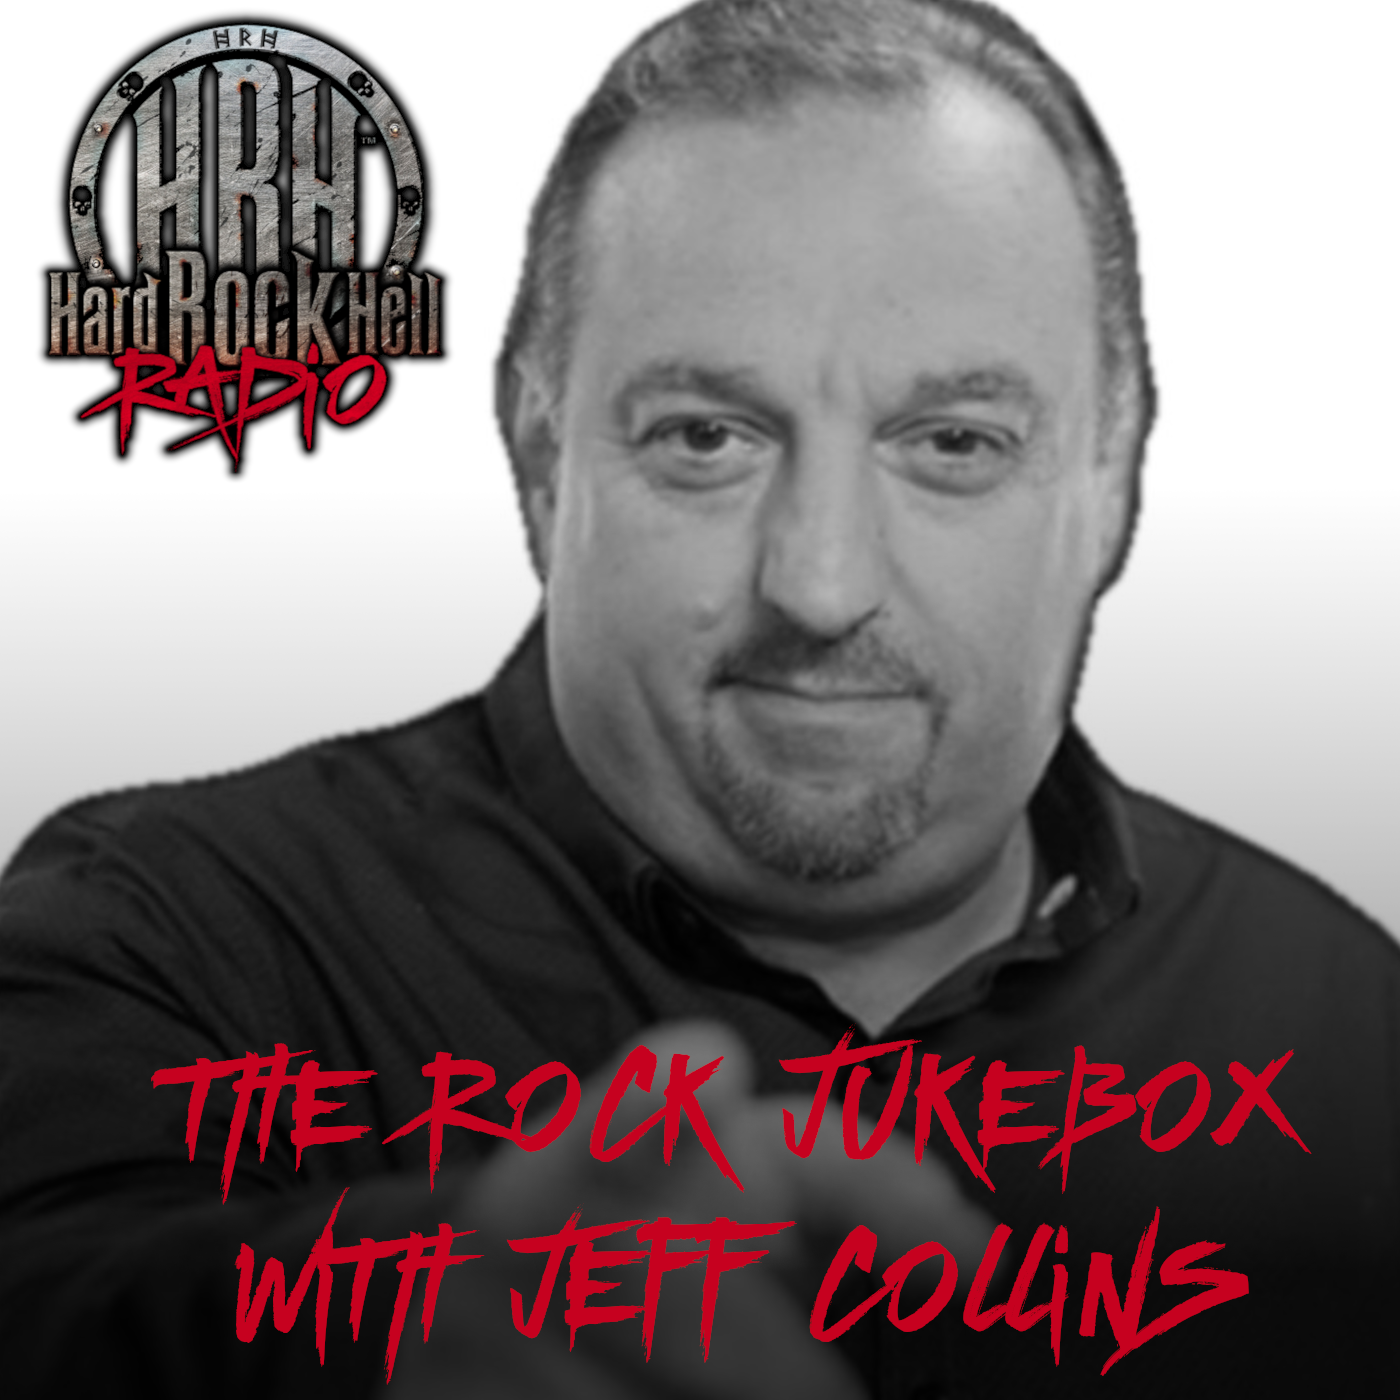 The Rock Jukebox with Jeff Collins